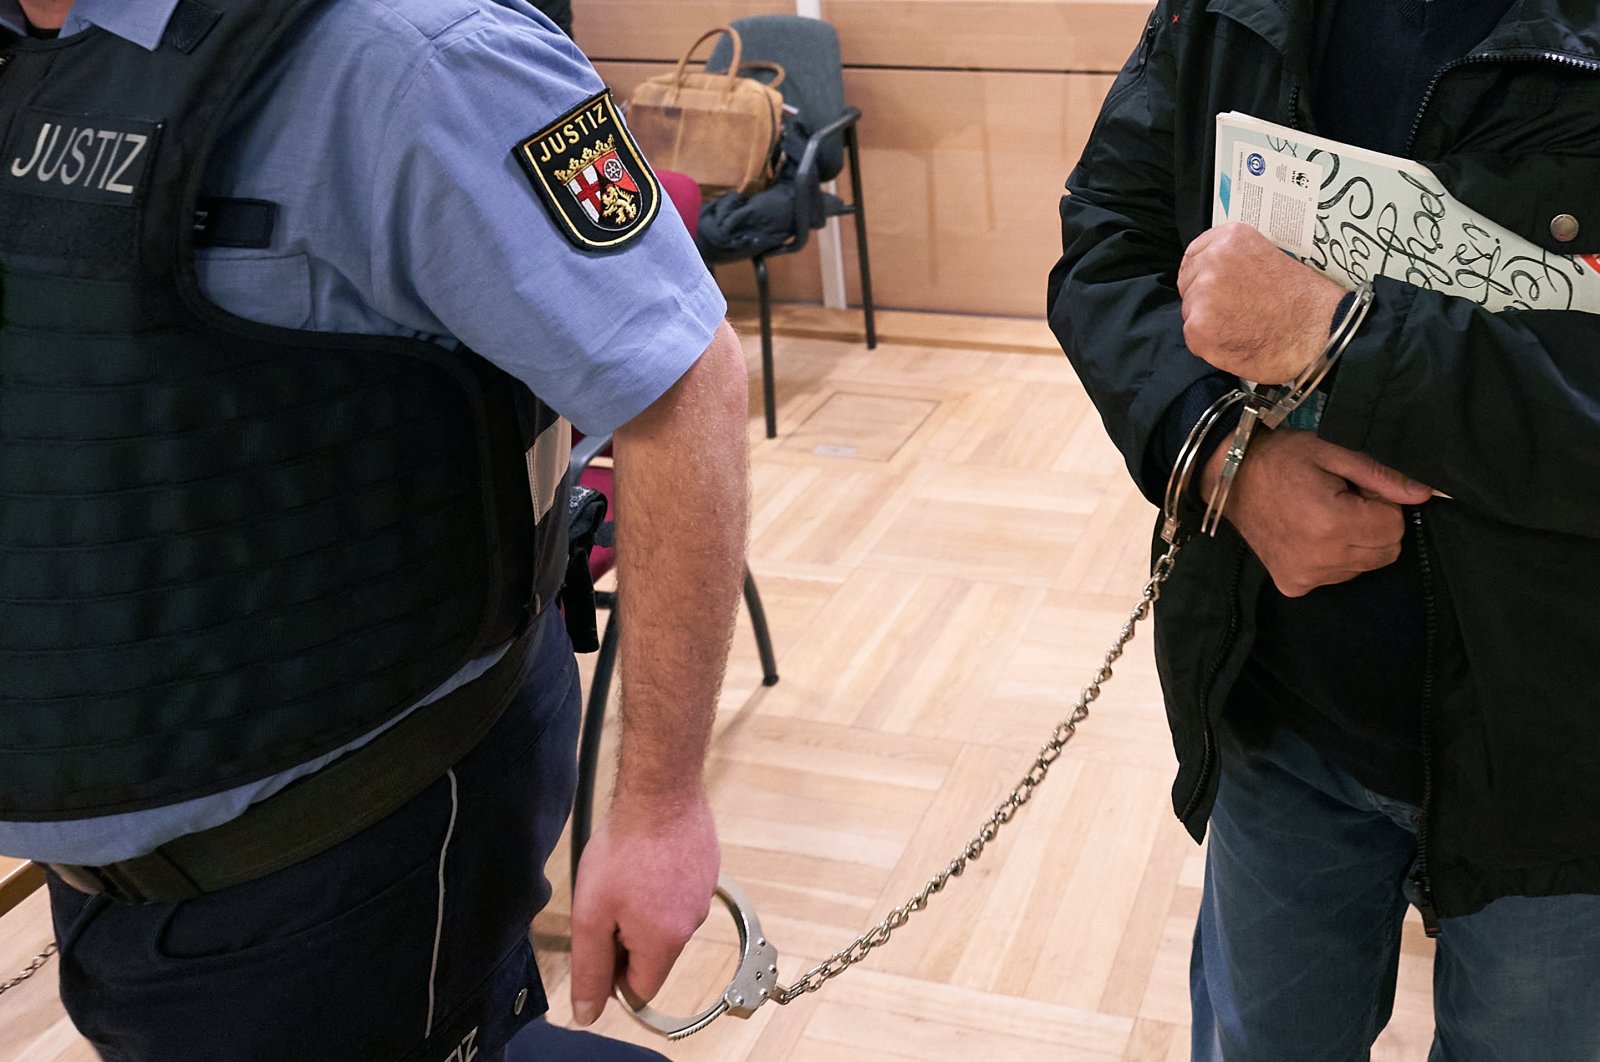 The accused (R) is led by a judicial officer into the hall of the Higher Regional Court, Koblenz, Germany, Feb. 27, 2020. (Getty Images)